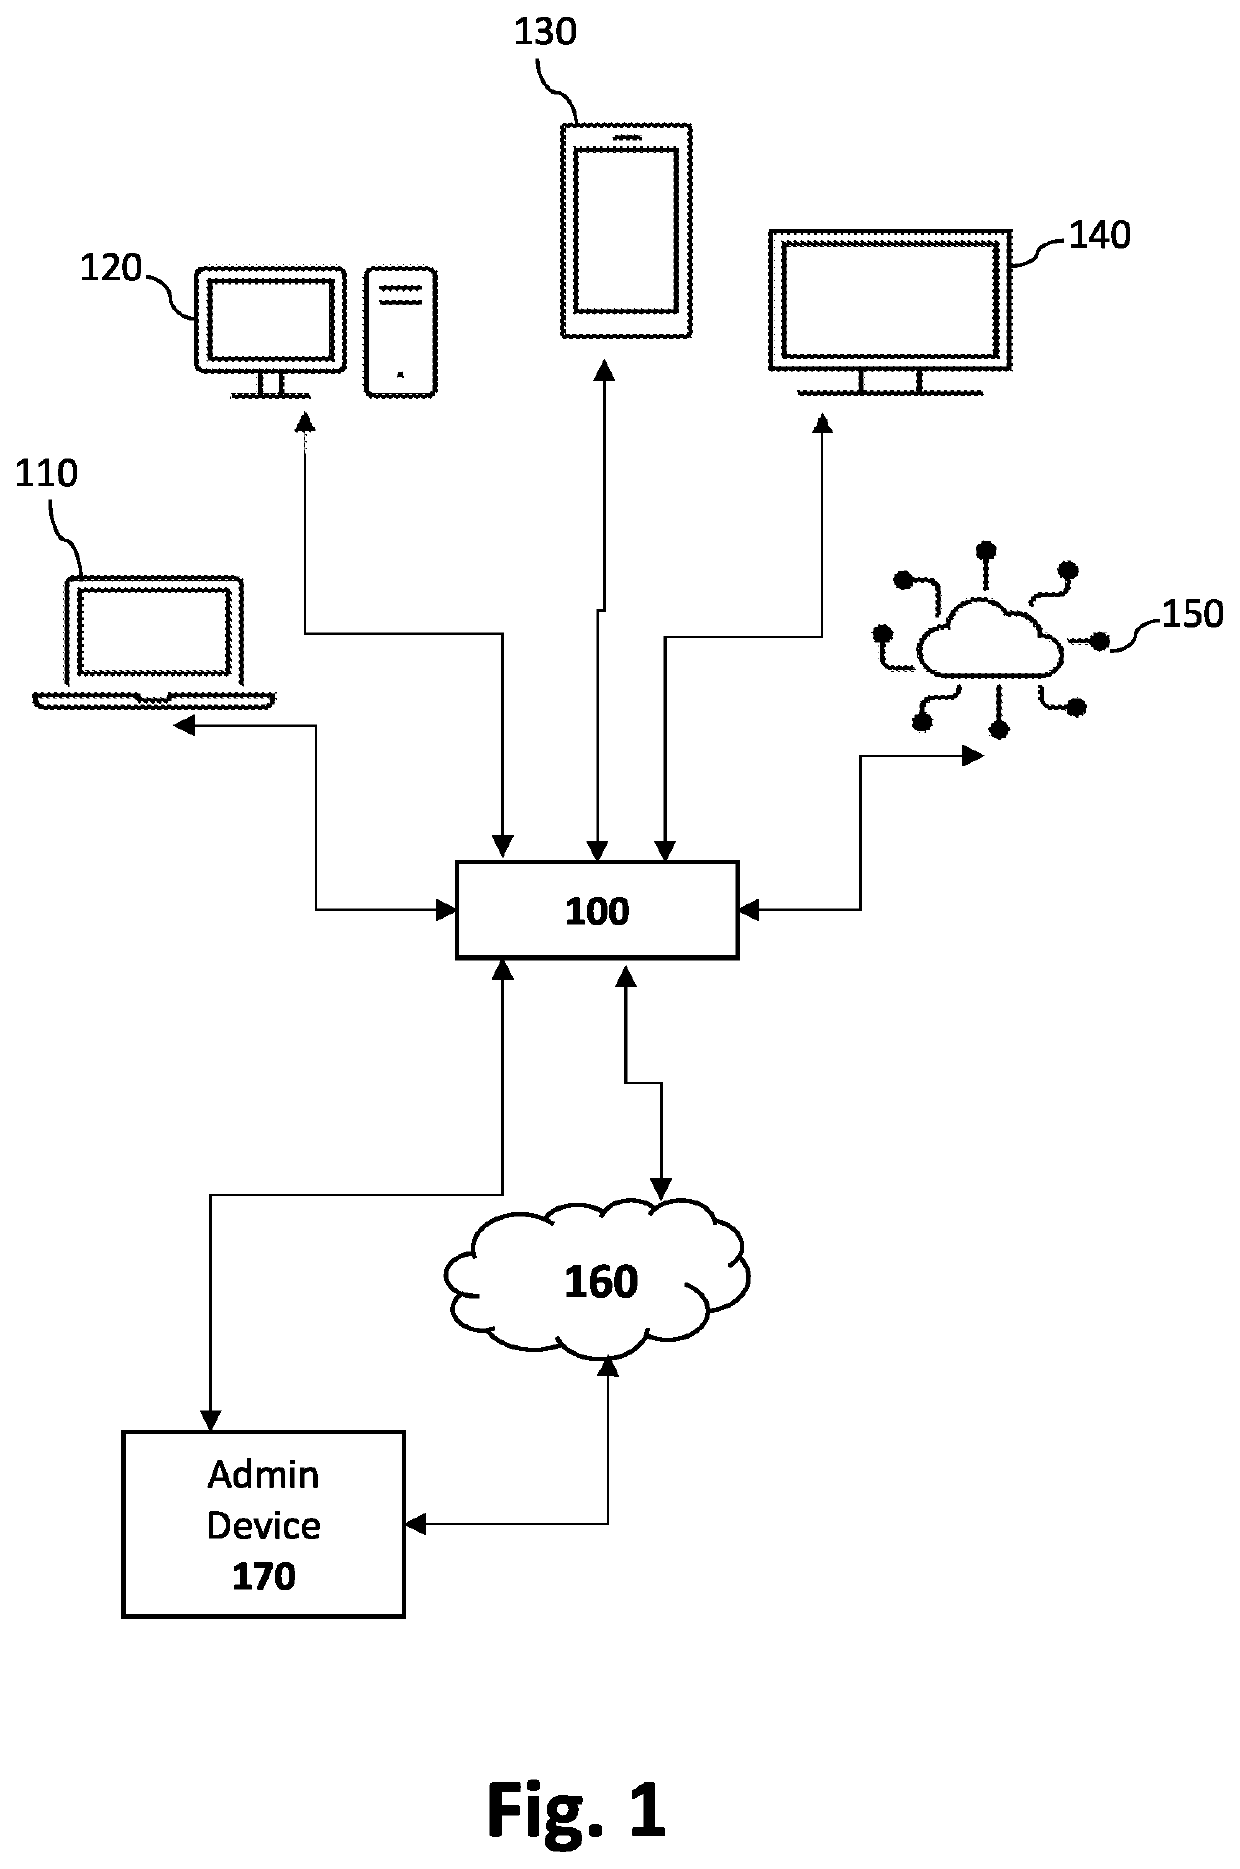 Physical and network security system and methods